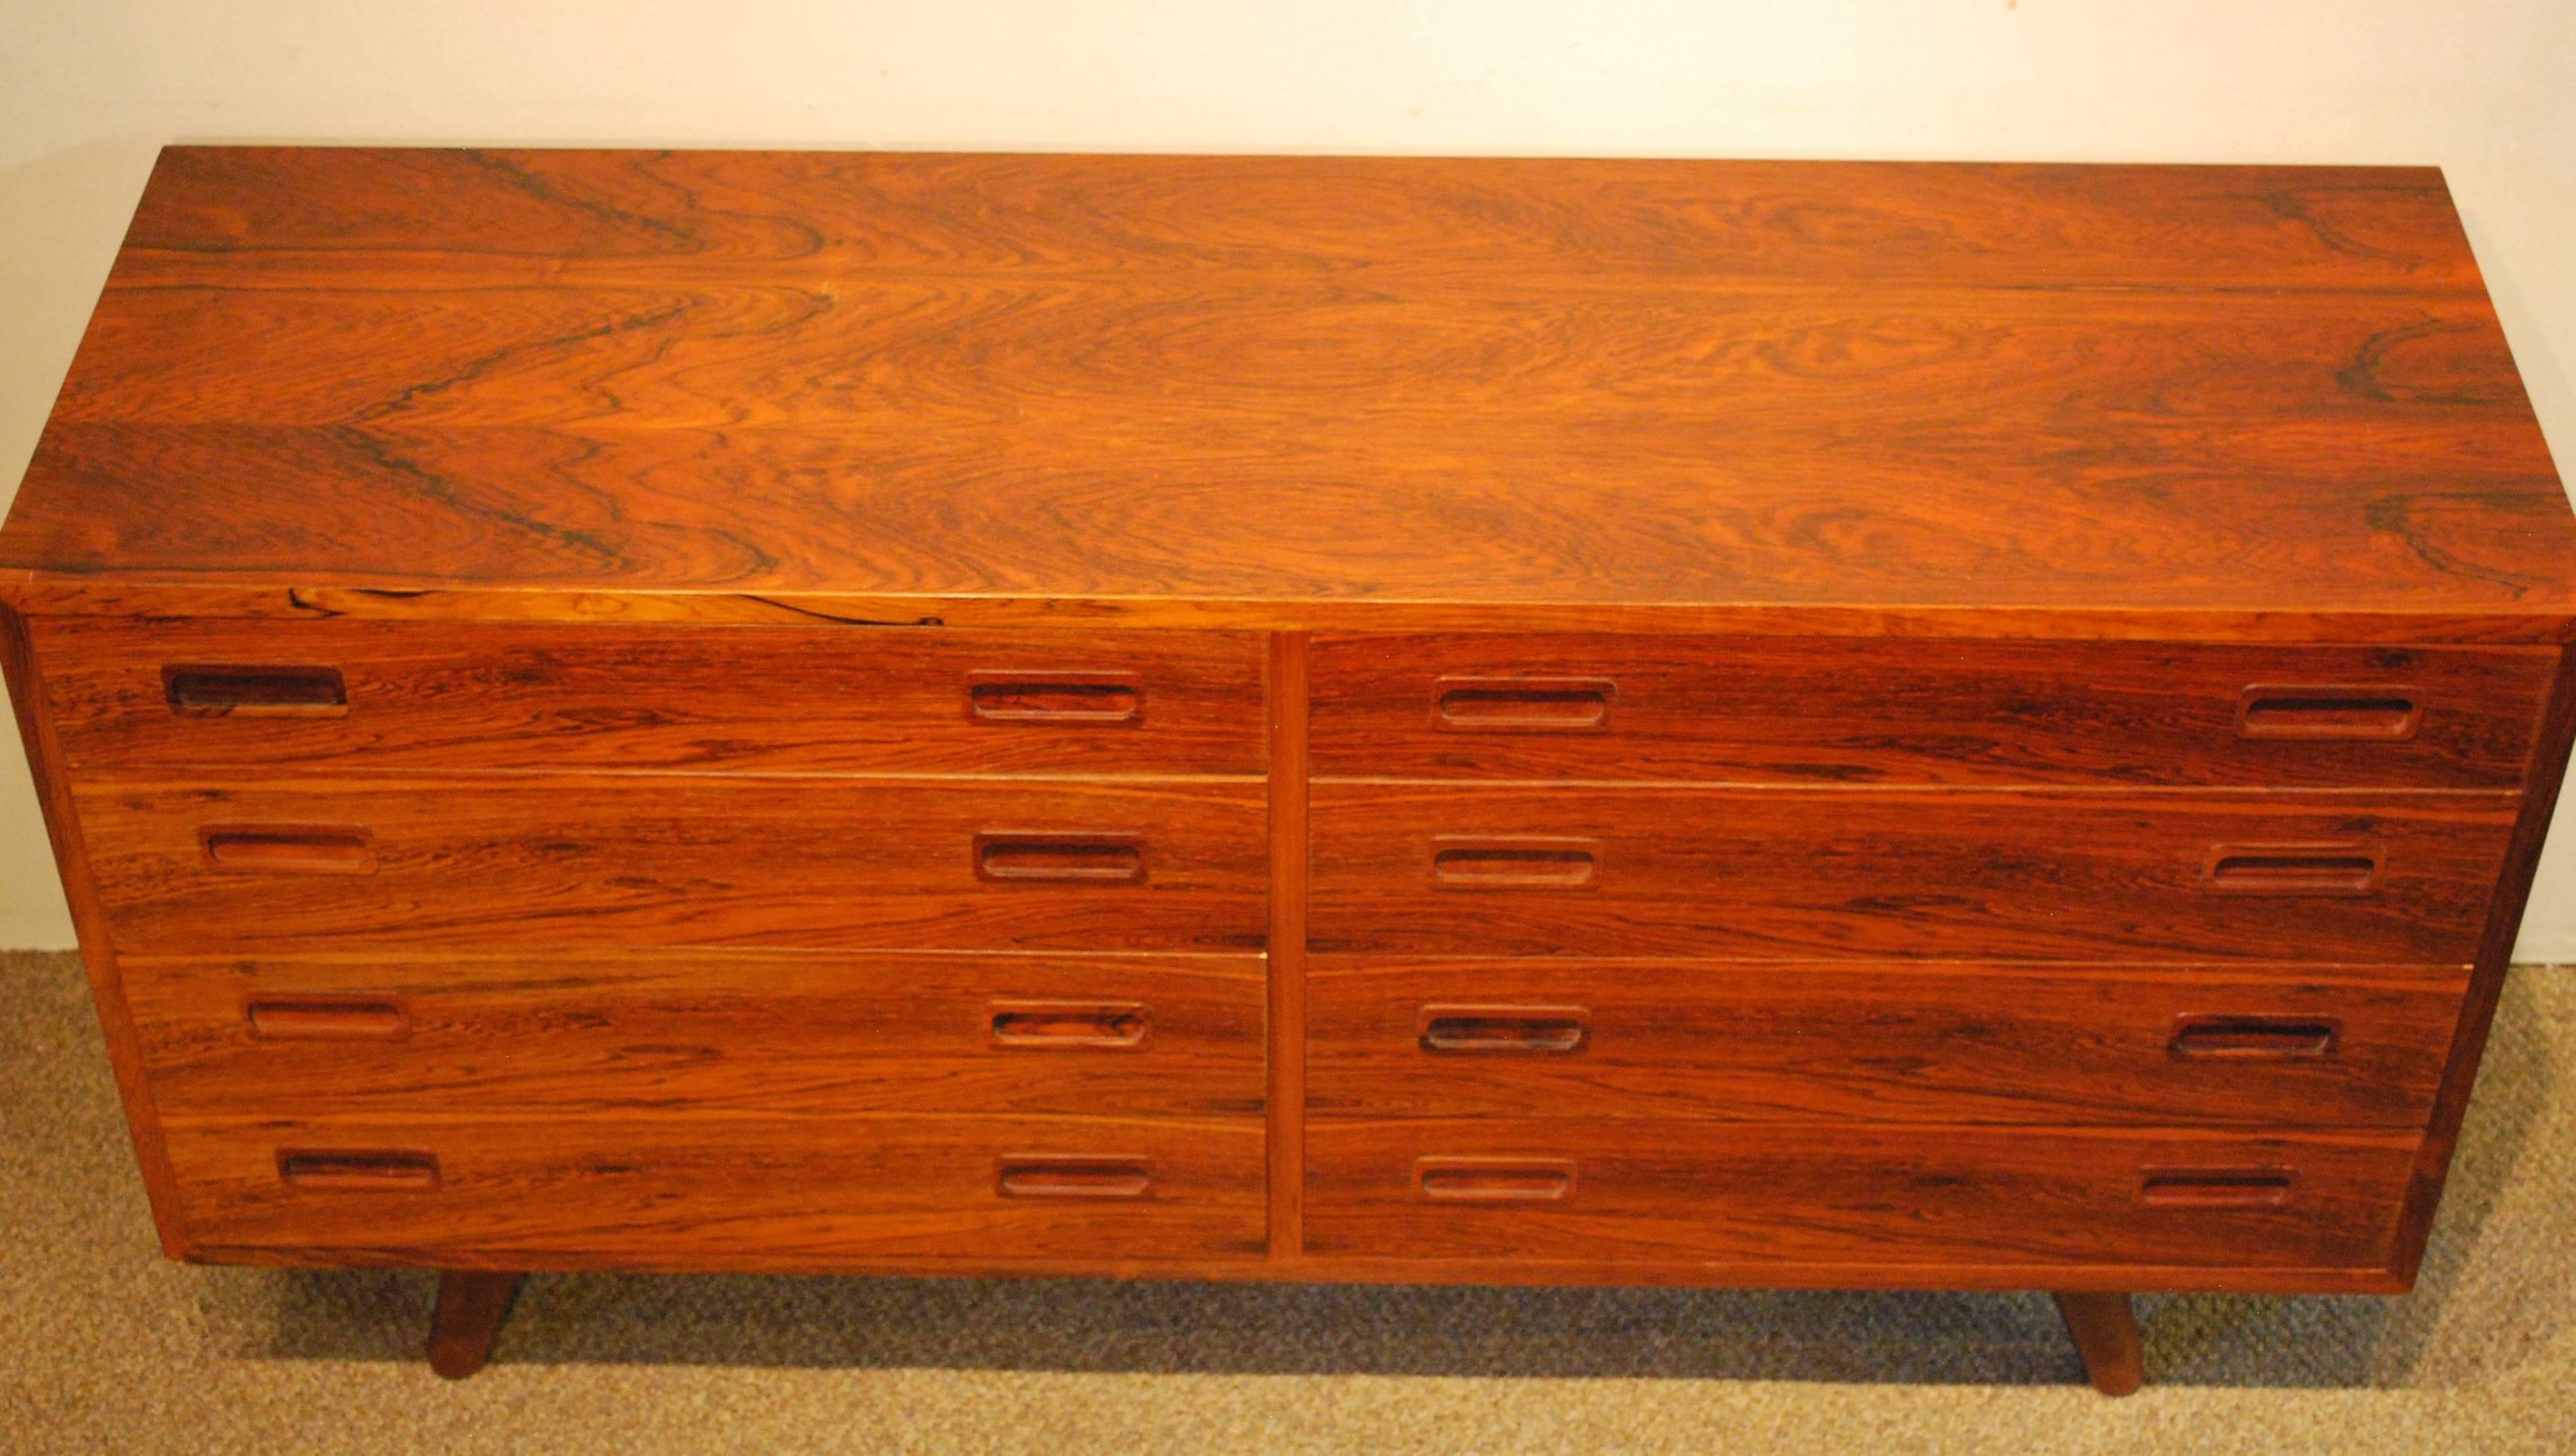 Large rosewood eight-drawer chest with continuous grain on all the rosewood surfaces. The hardwood interior is dovetailed on all joints. The factory mark and the Danish Mobelkontrol mark are visible on this piece. Note the Hansen like mitered